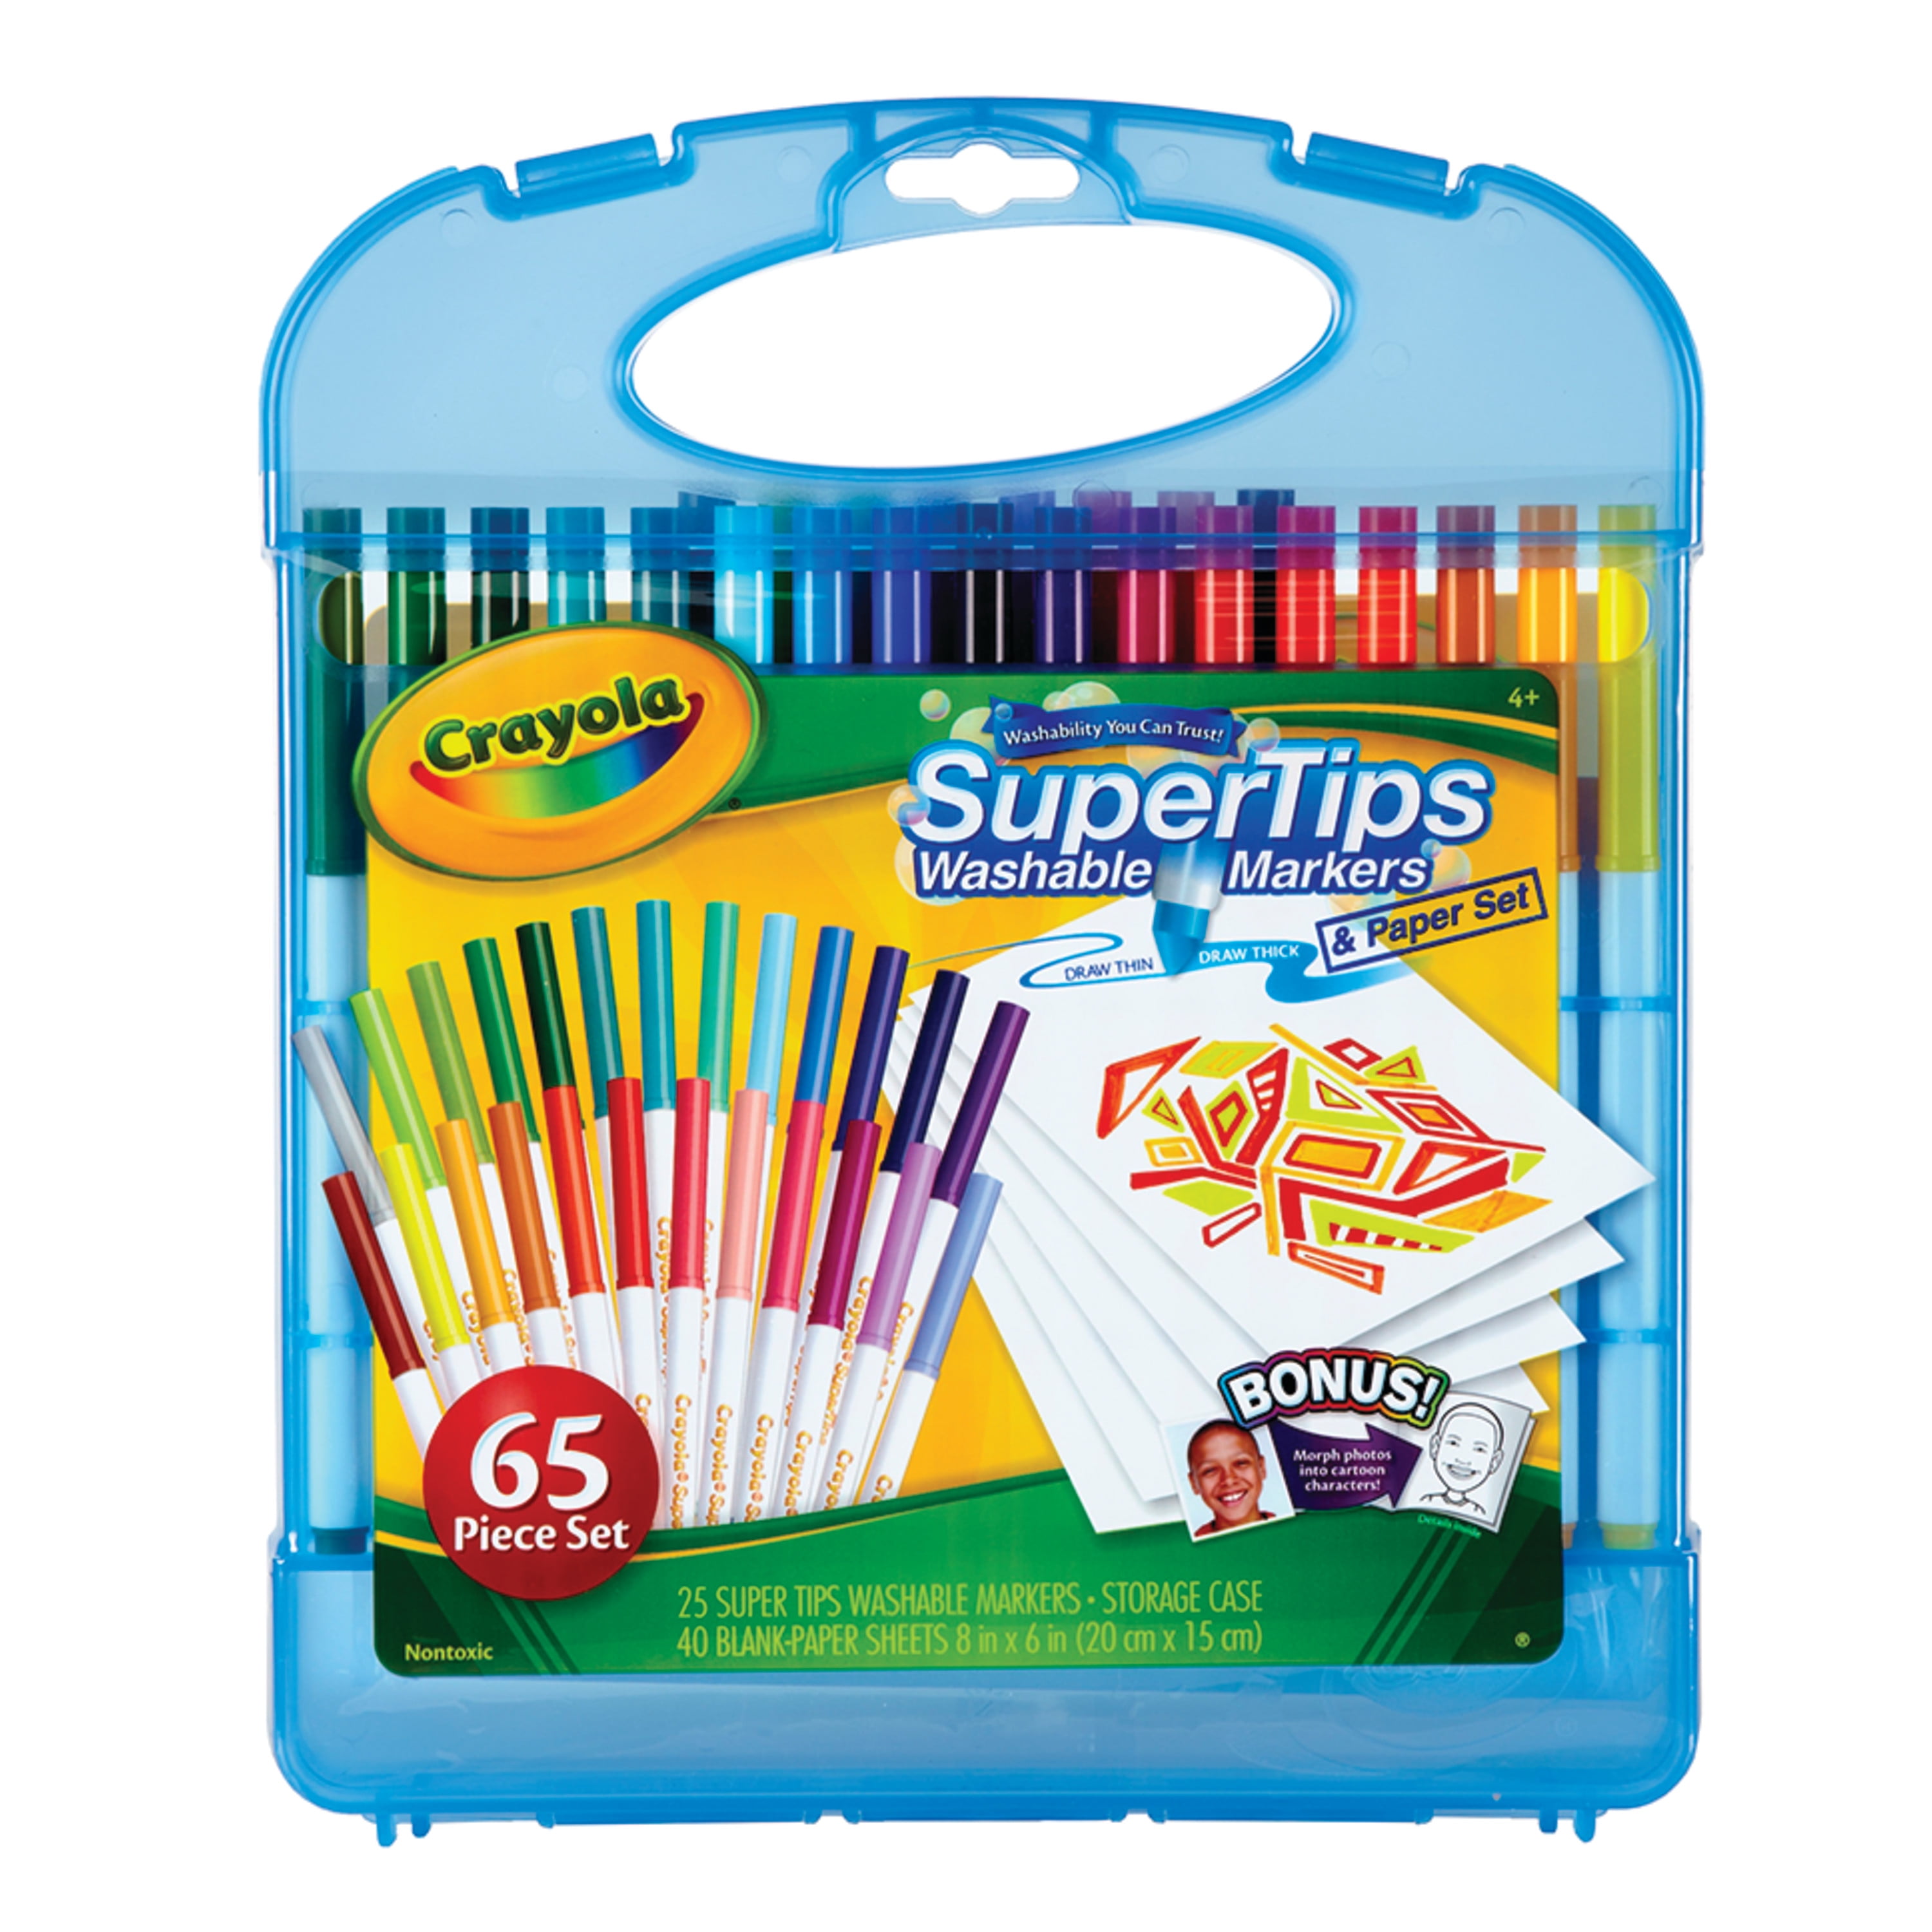 Crayola Pip-Squeaks Washable Markers and Paper Set, 65 pc - Fry's